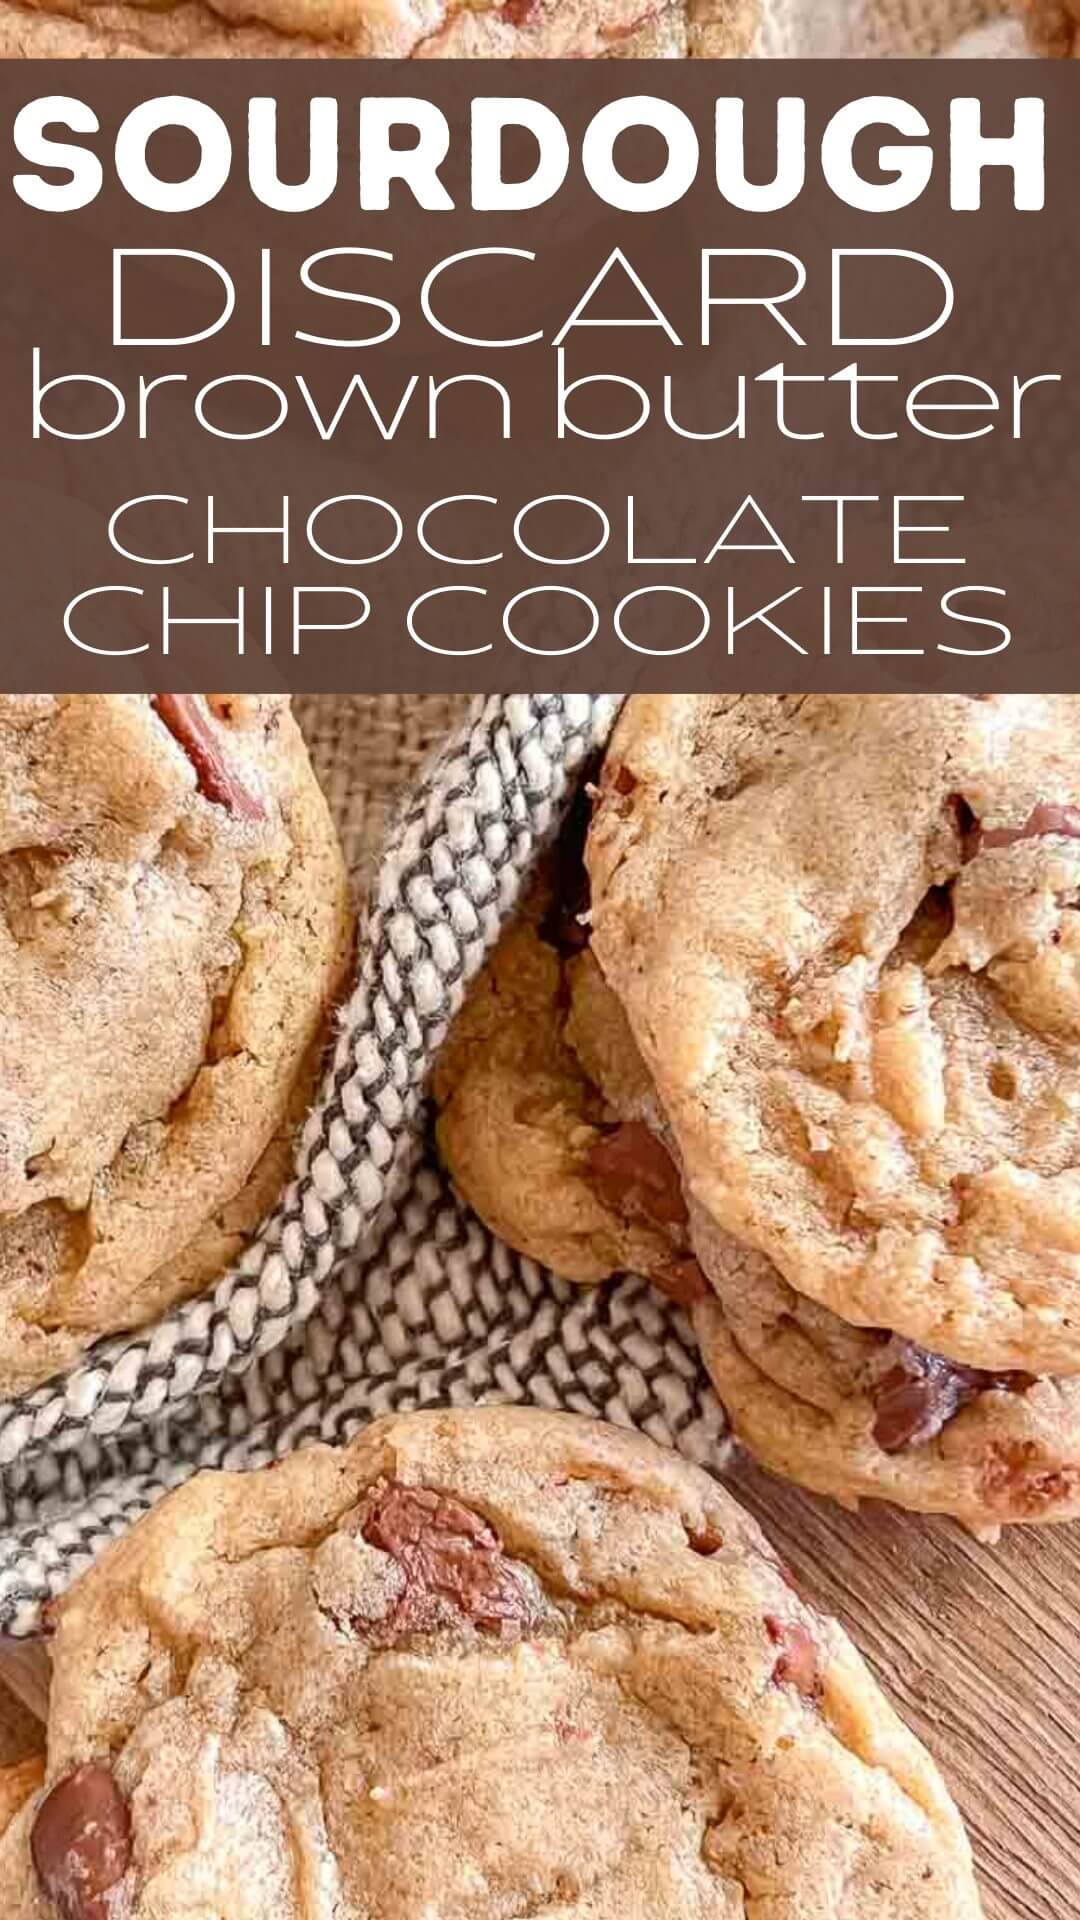 Make sourdough cookies using your discard! This sourdough discard brown butter chocolate chip cookie recipe is so amazing! Making sourdough cookies is a great way to use up your sourdough discard and make something amazing for family or friends to enjoy!